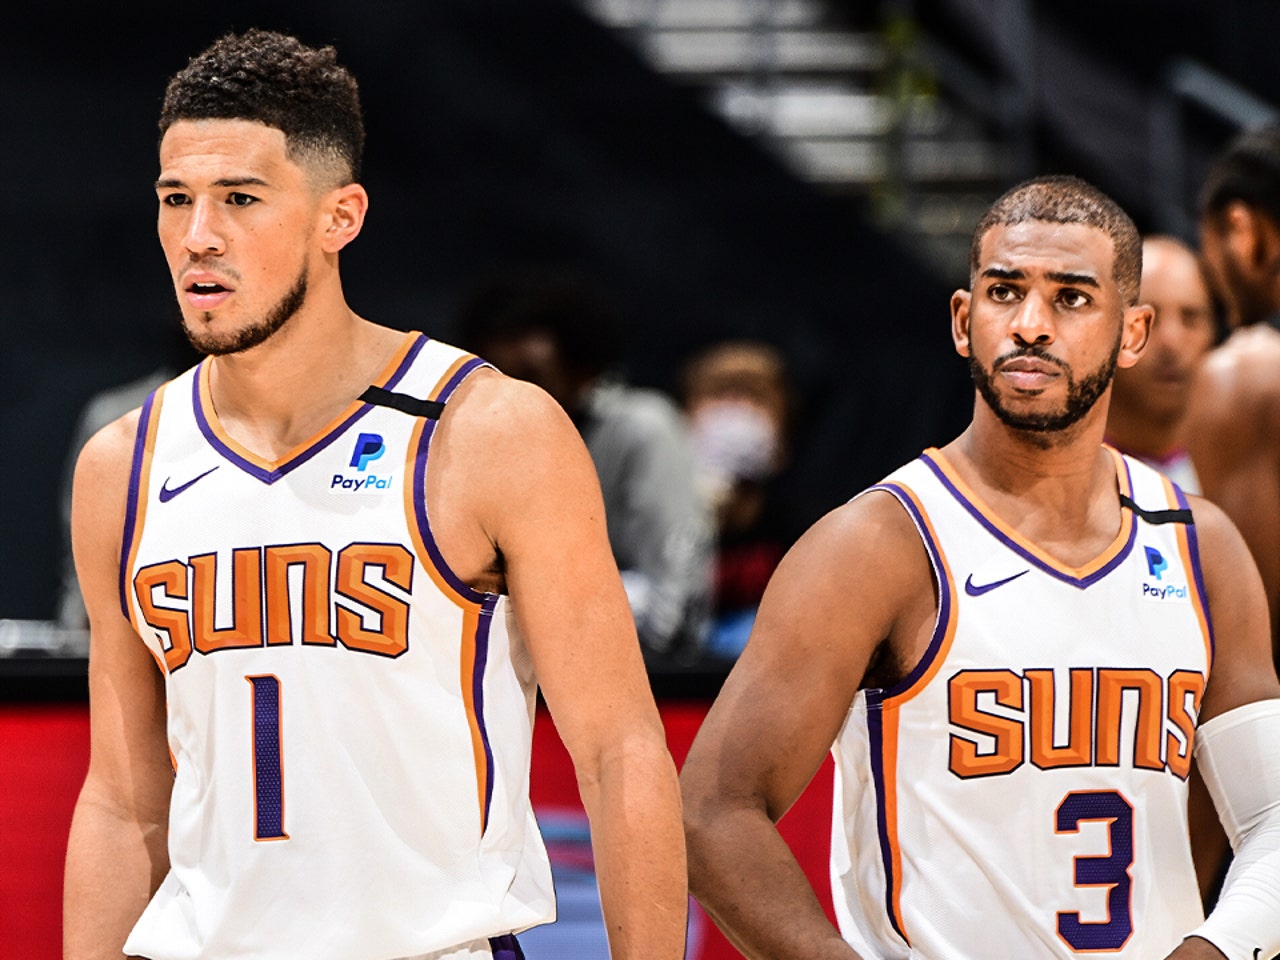 Chris Paul, Devin Booker, and Deandre Ayton and more top options